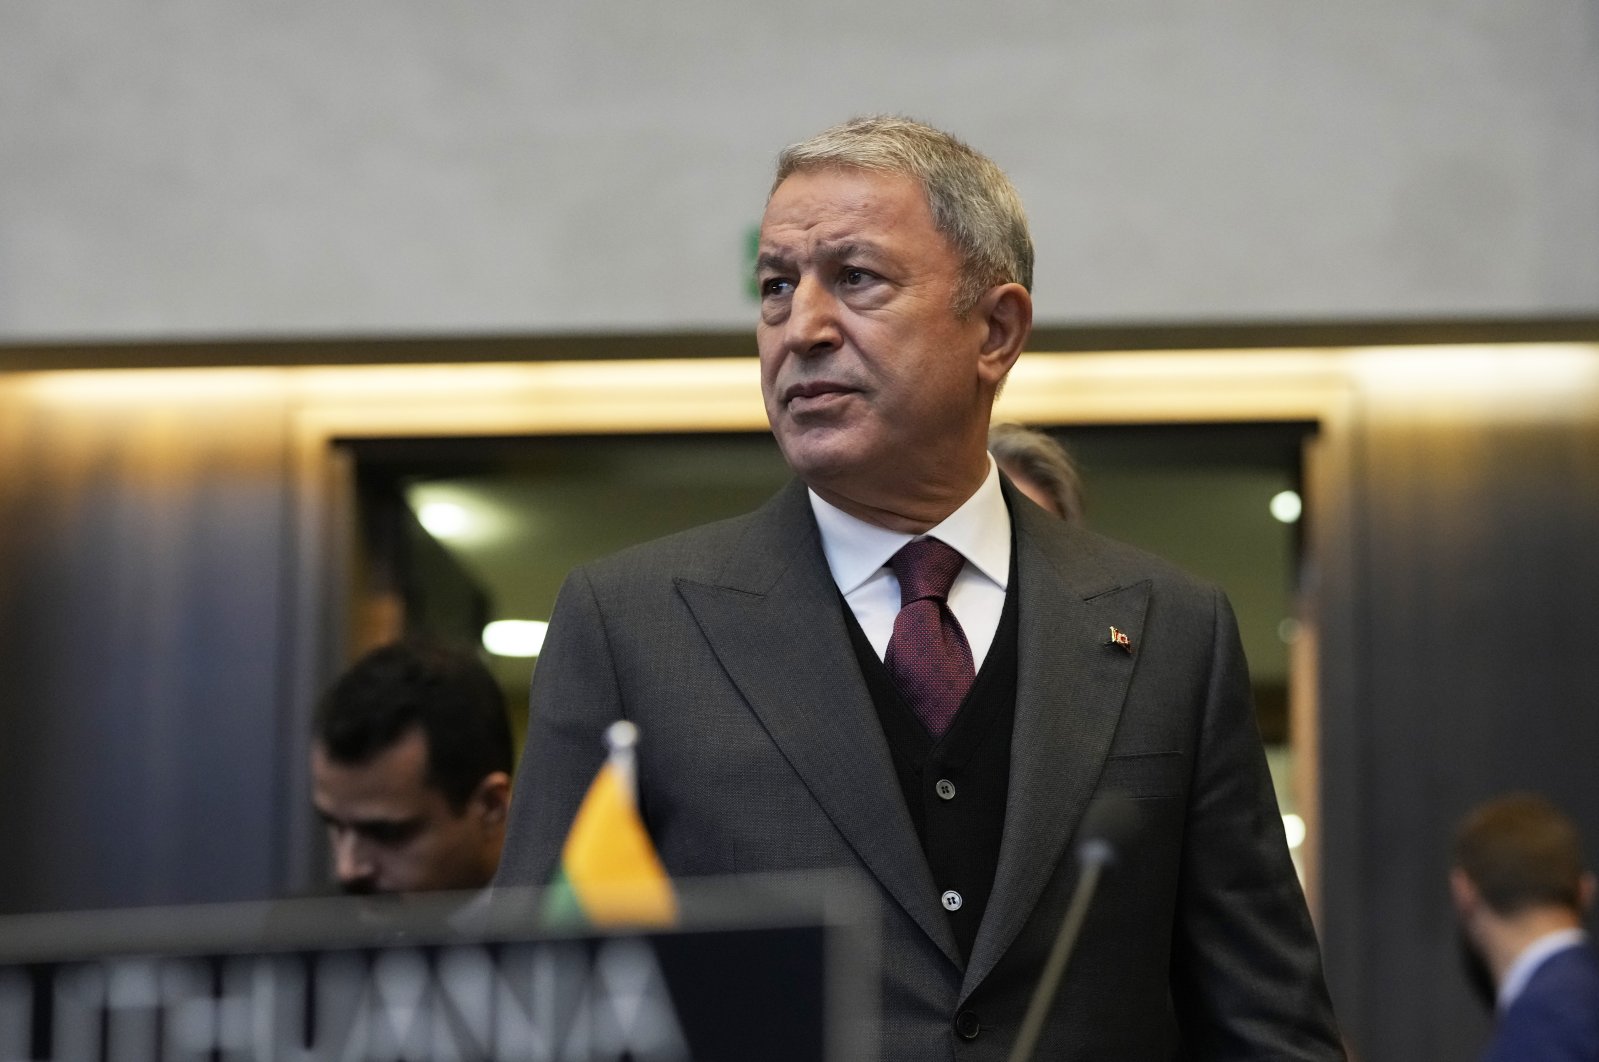 Defense Minister Hulusi Akar arrives for a North Atlantic Council during a NATO defense ministers meeting at NATO headquarters in Brussels, Oct. 22, 2021. (AP File Photo)